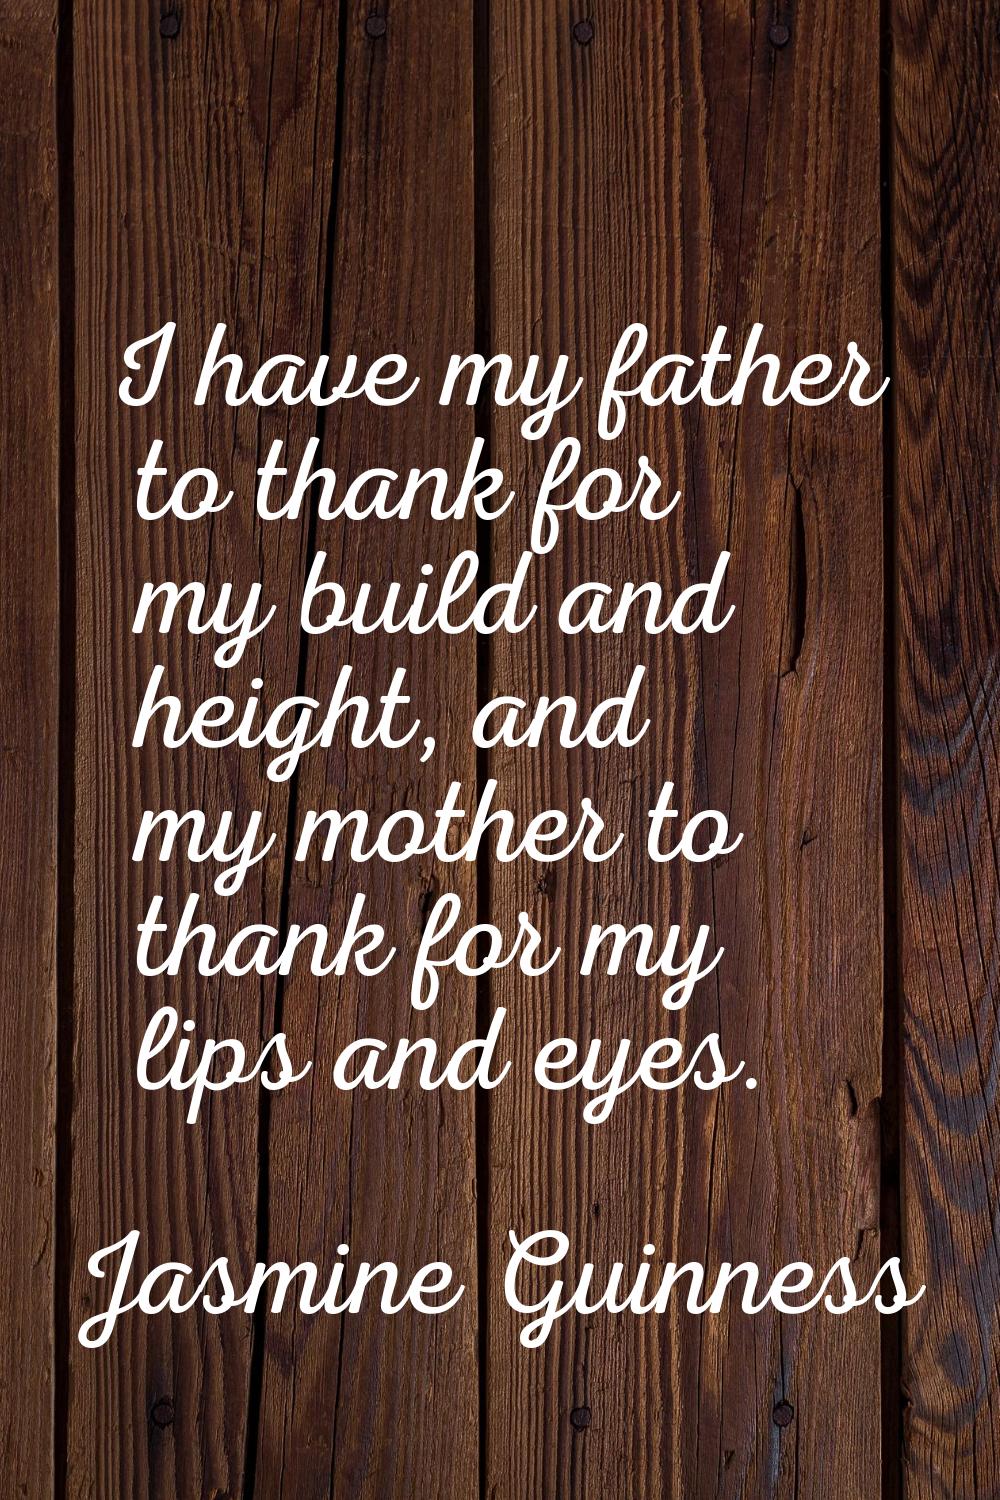 I have my father to thank for my build and height, and my mother to thank for my lips and eyes.